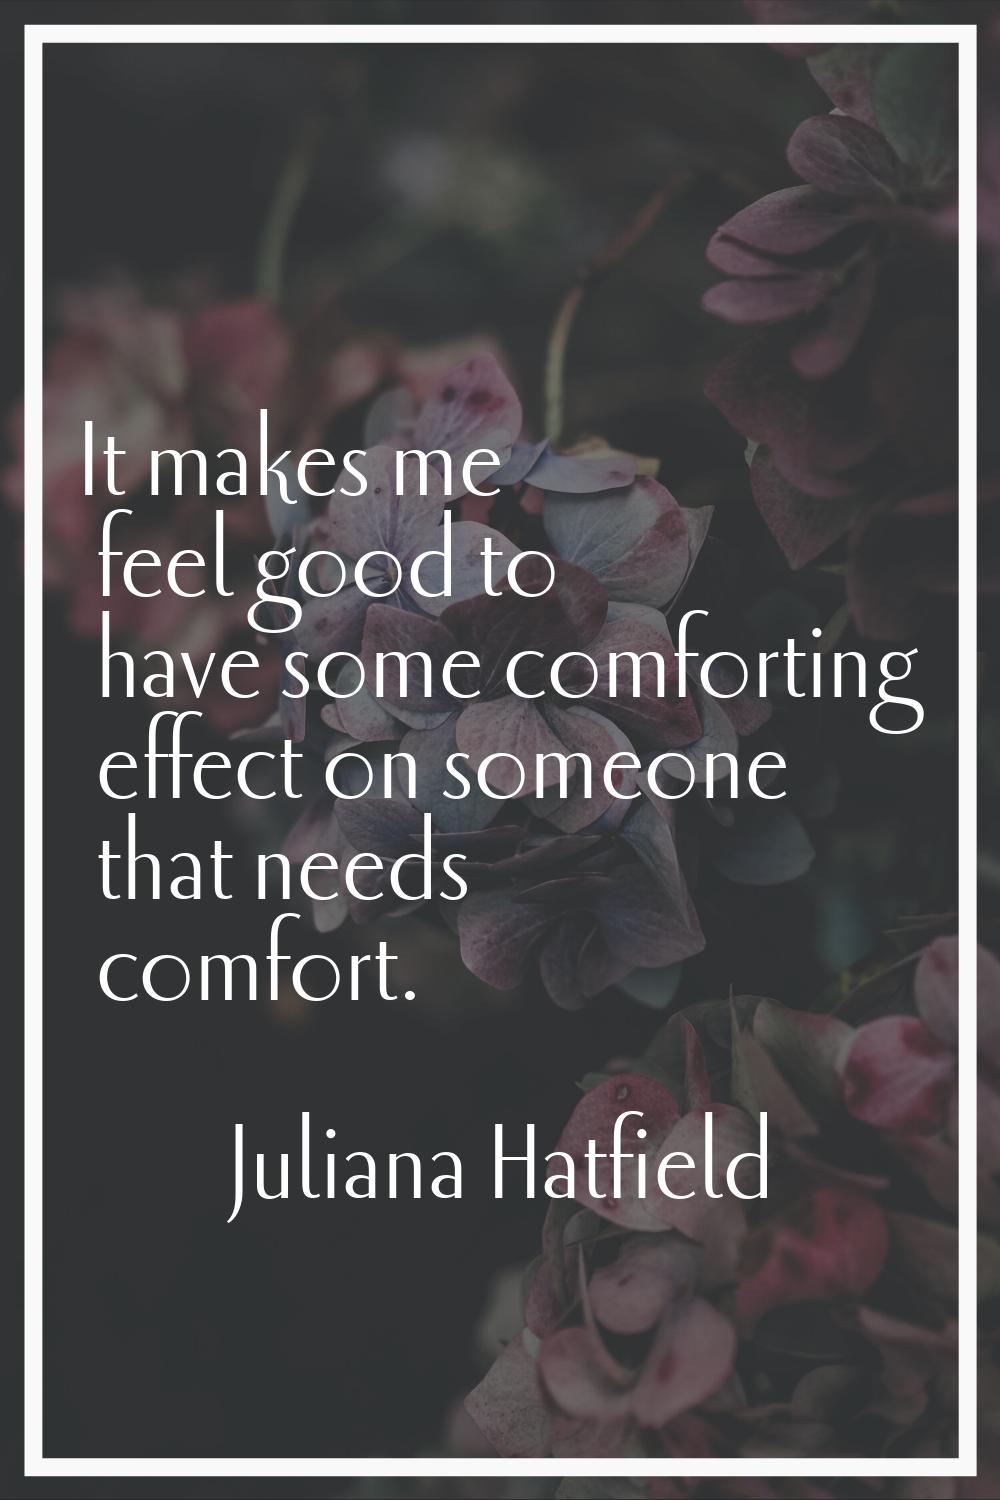 It makes me feel good to have some comforting effect on someone that needs comfort.